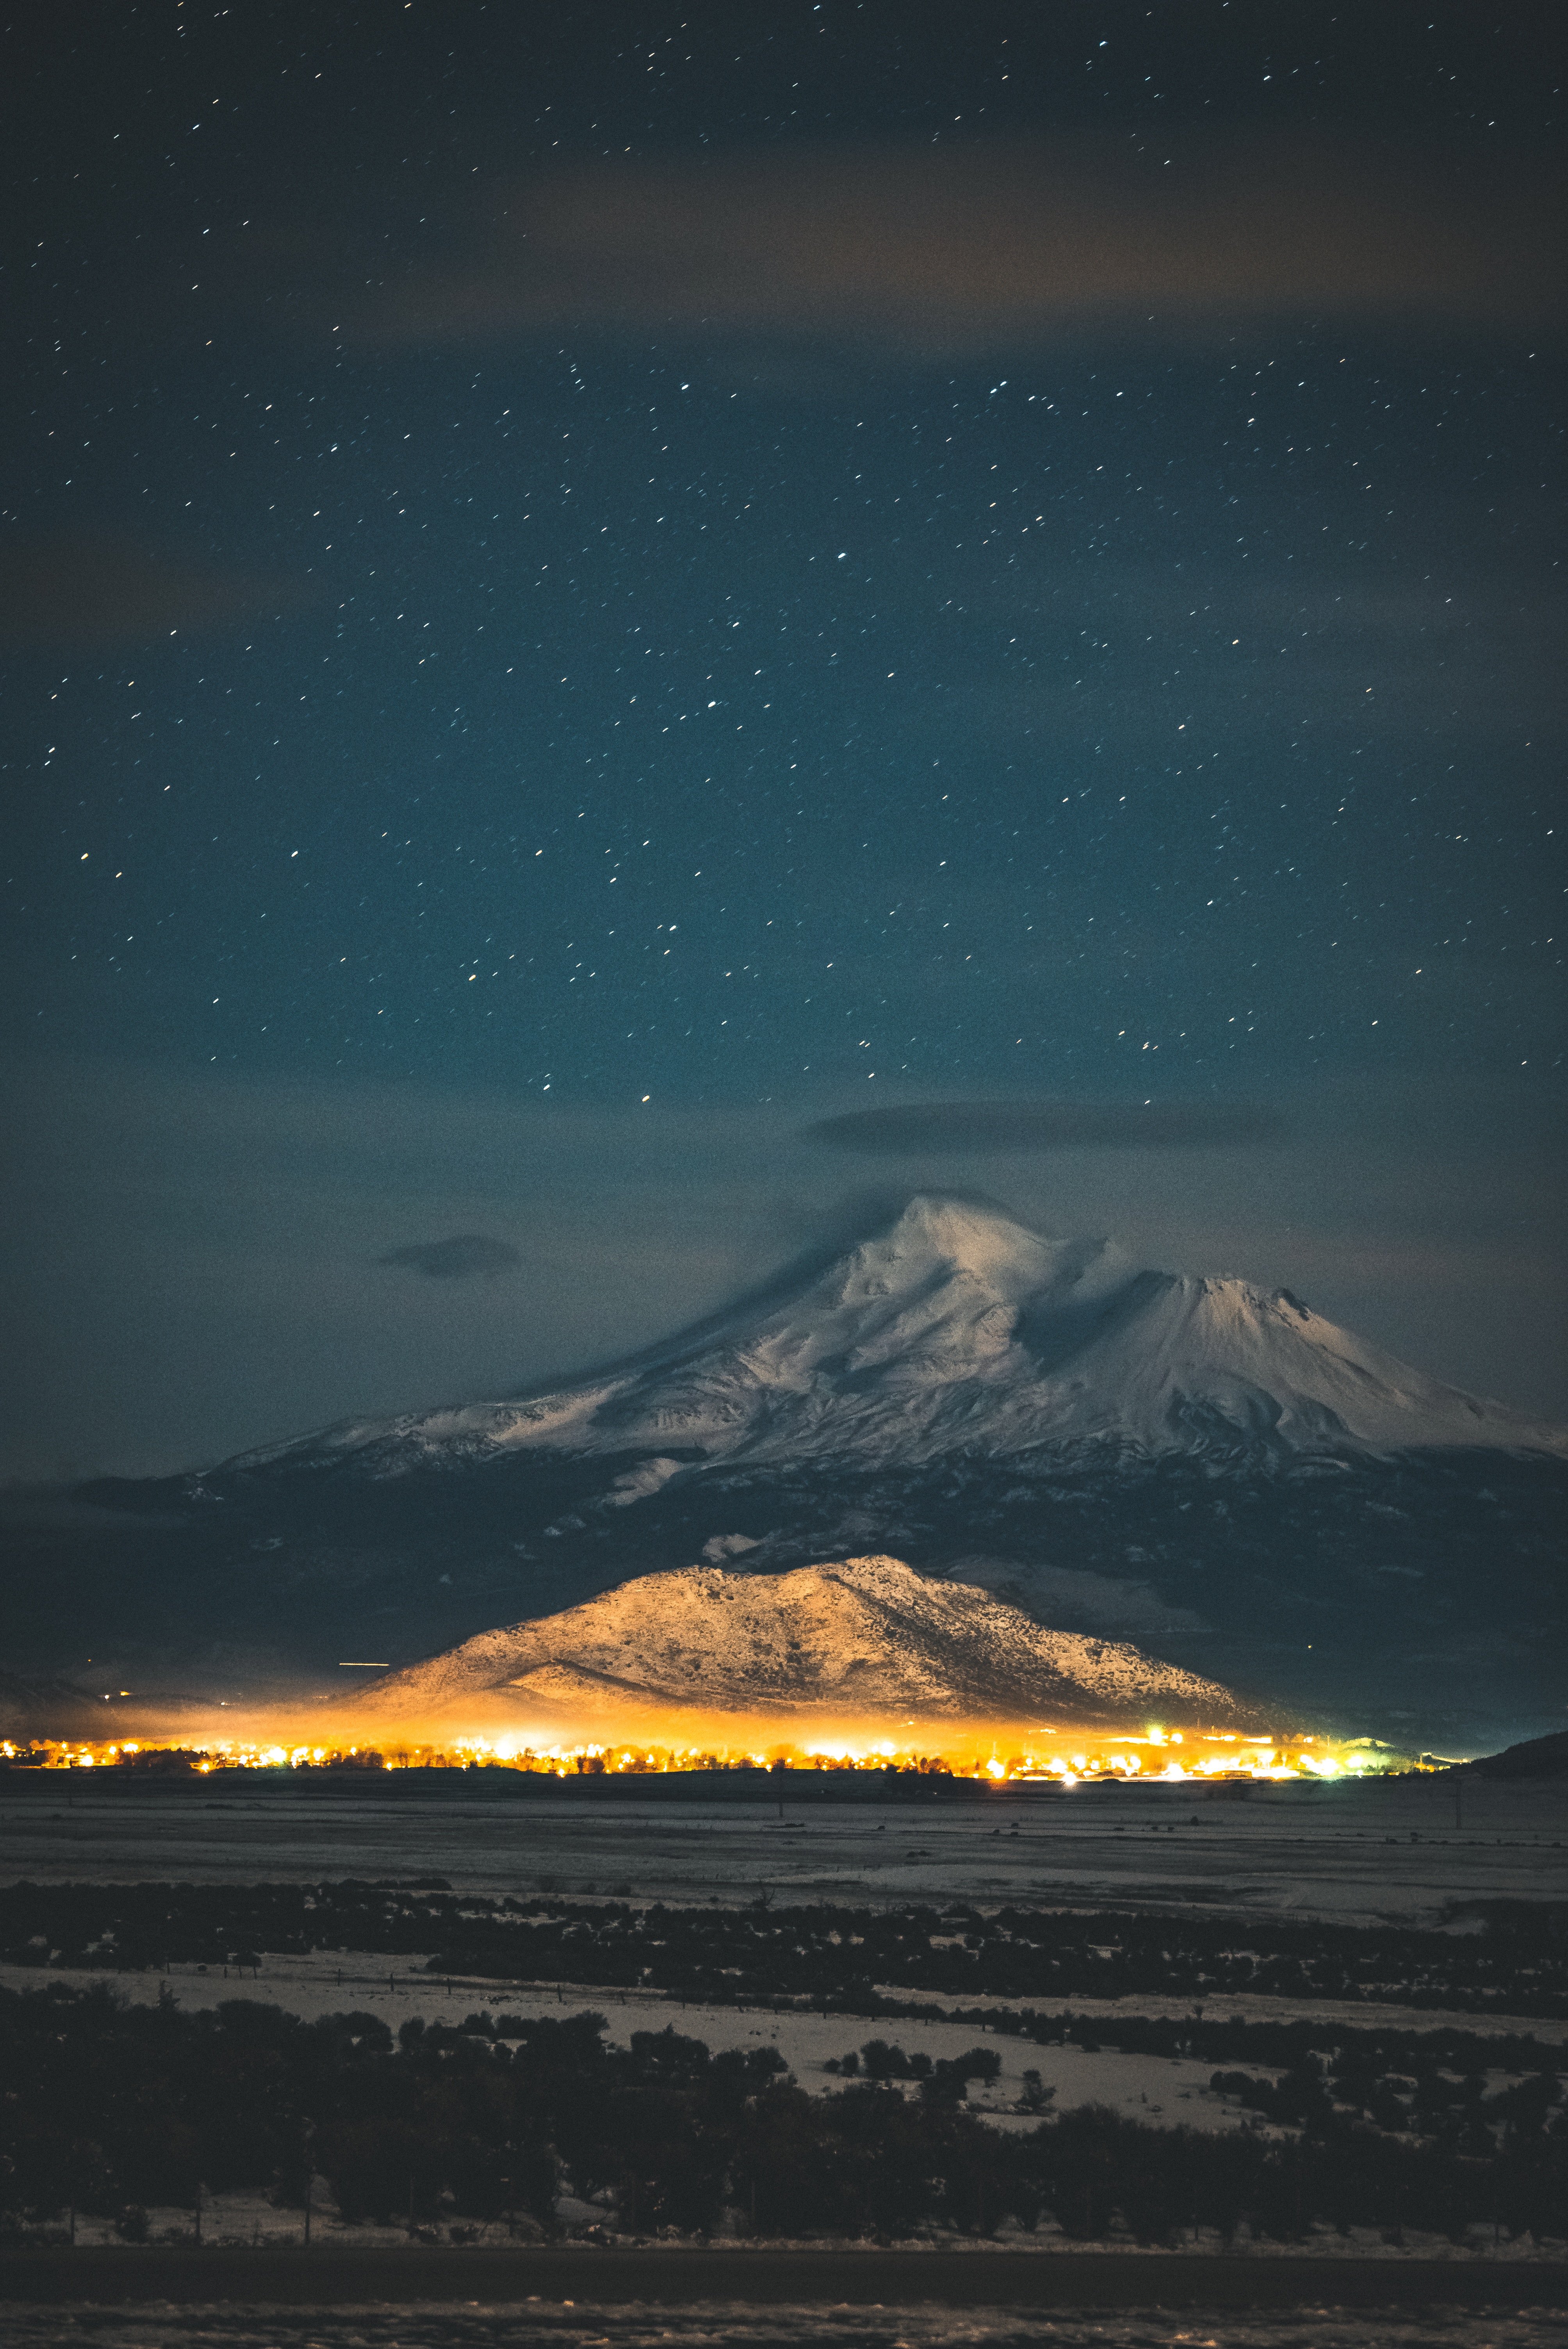 New Lock Screen Wallpapers nature, night, mountain, starry sky, snow covered, snowbound